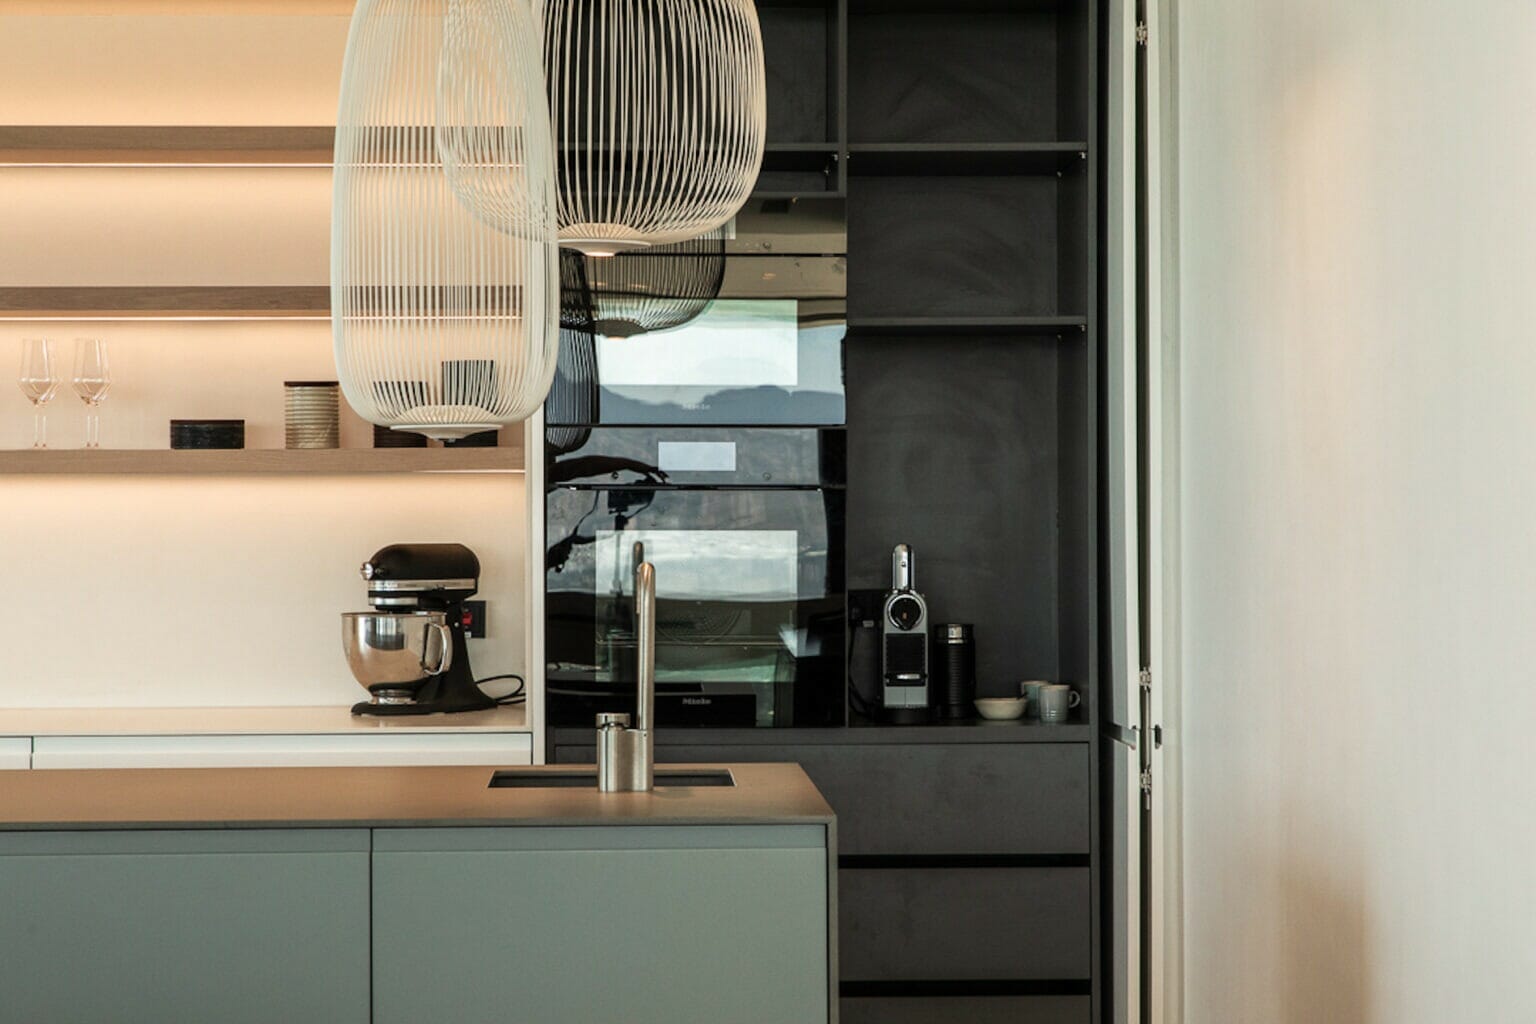 Pocket doors that conceal ovens and small coffee station